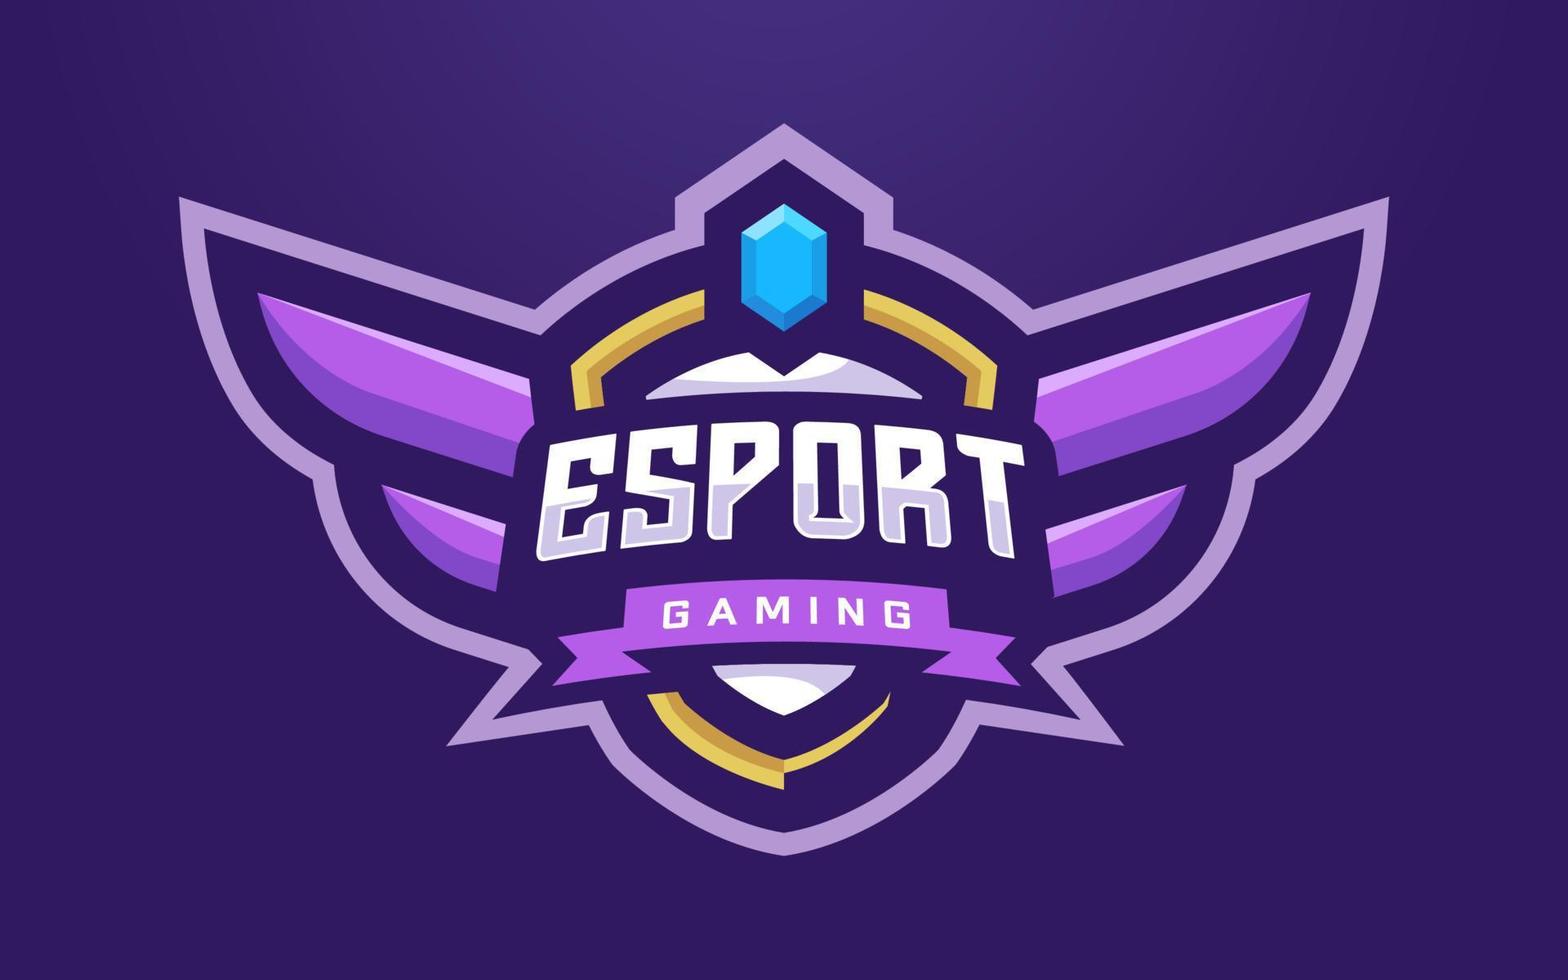 esports-logo-template-for-gaming-team-or-tournament-vector